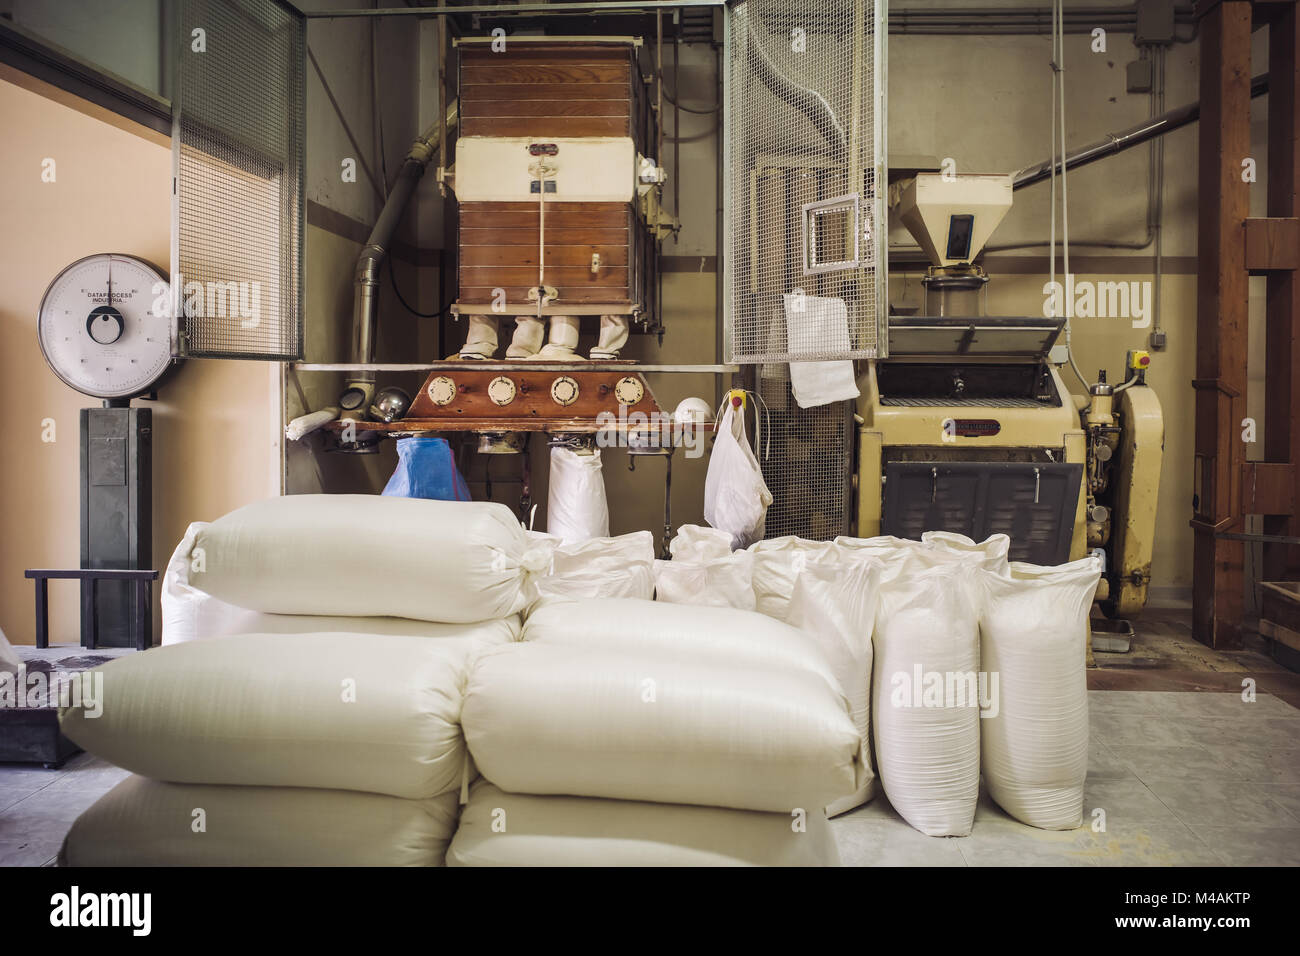 Production of genuine wheat flour in an ancient mill in Erchie, Puglia Stock Photo